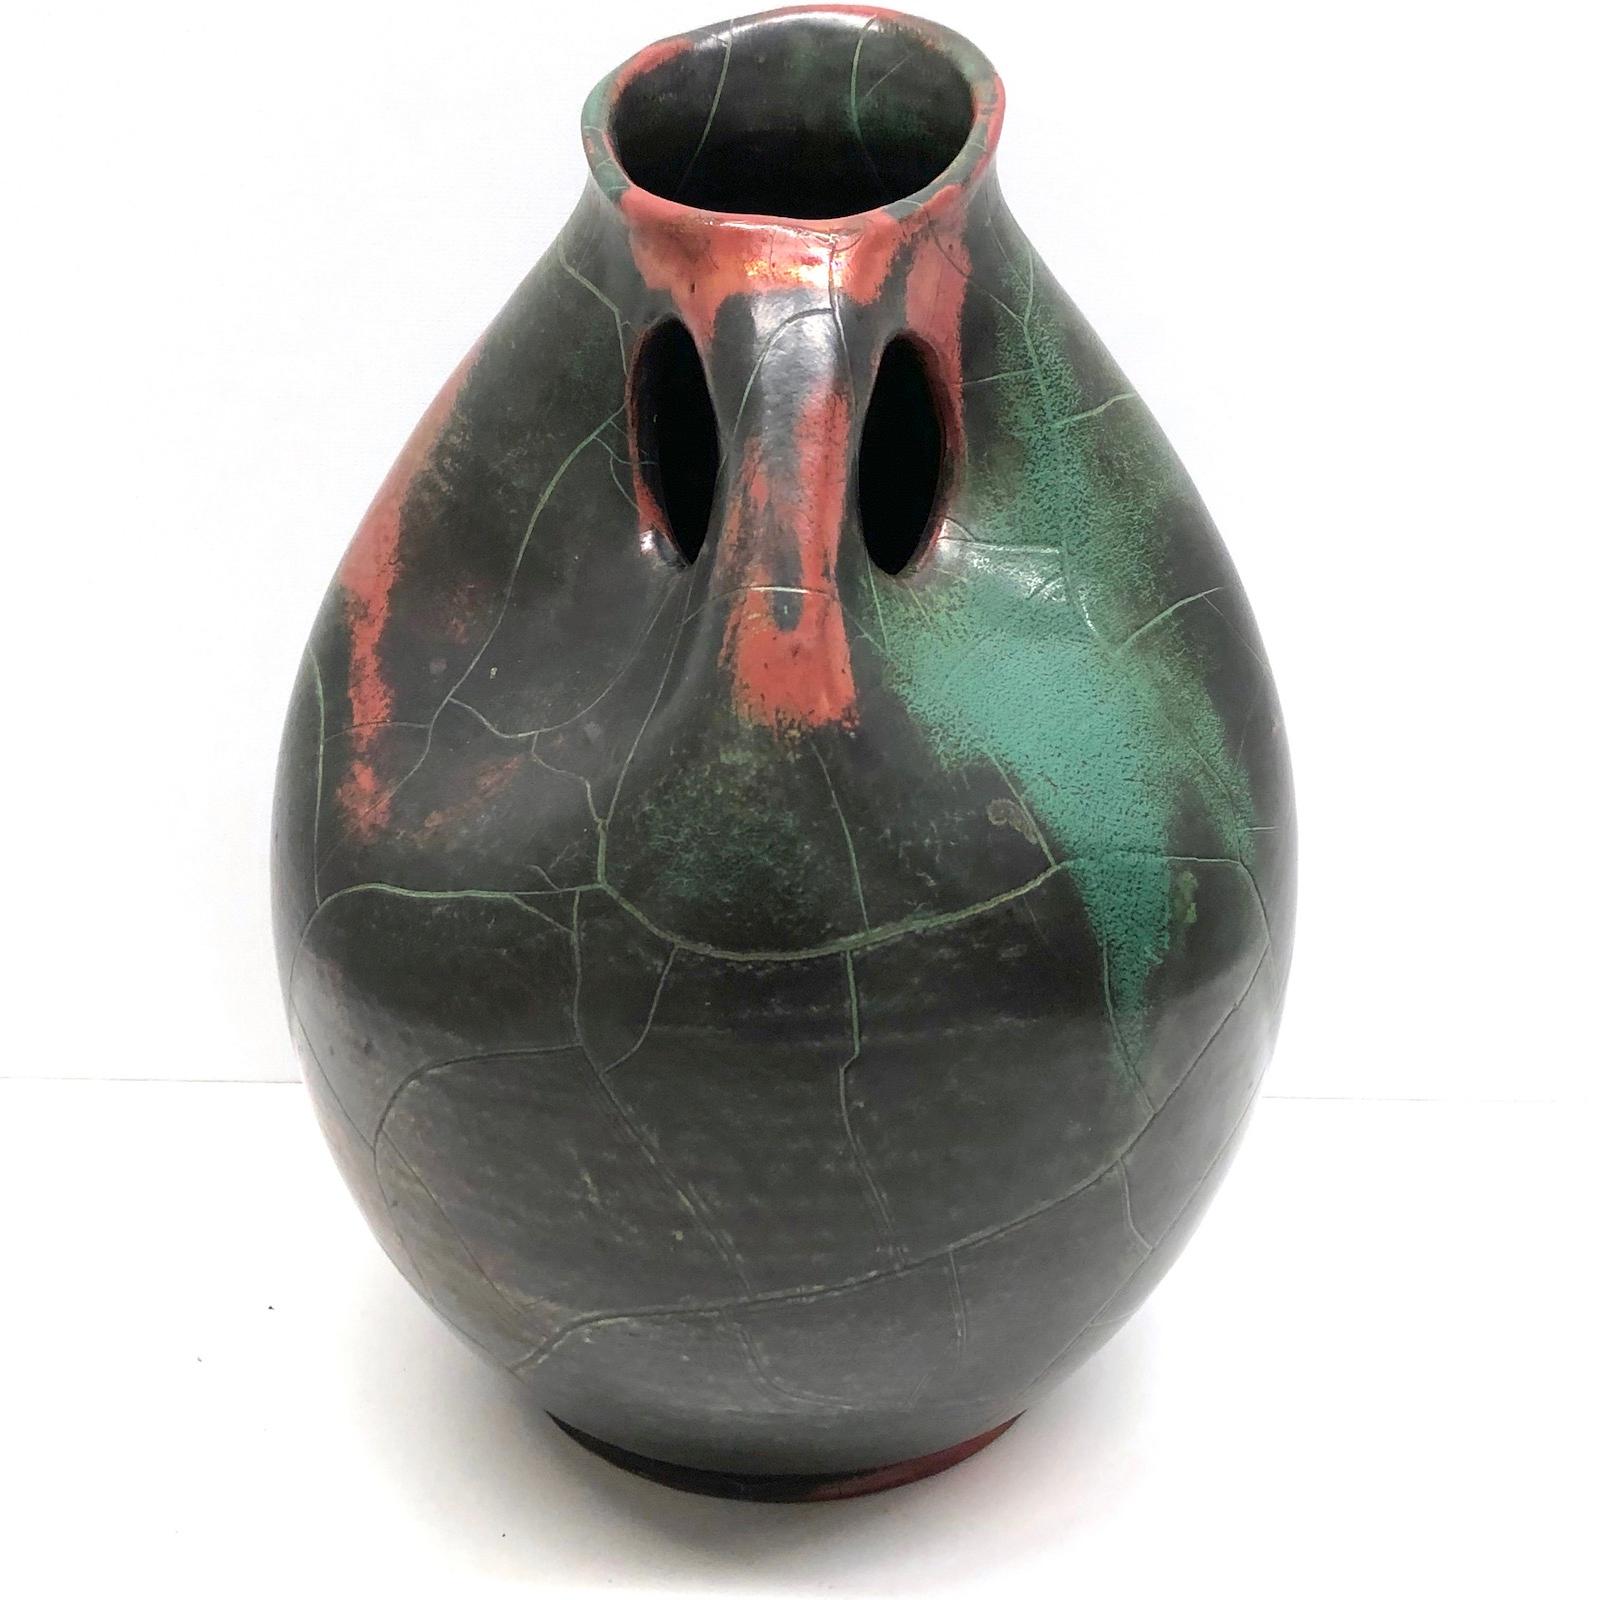 An amazing midcentury art pottery vase made in Germany, circa 1950s. Extremely nice exterior, marked. Vase is in very good condition with no chips, cracks, or flea bites.